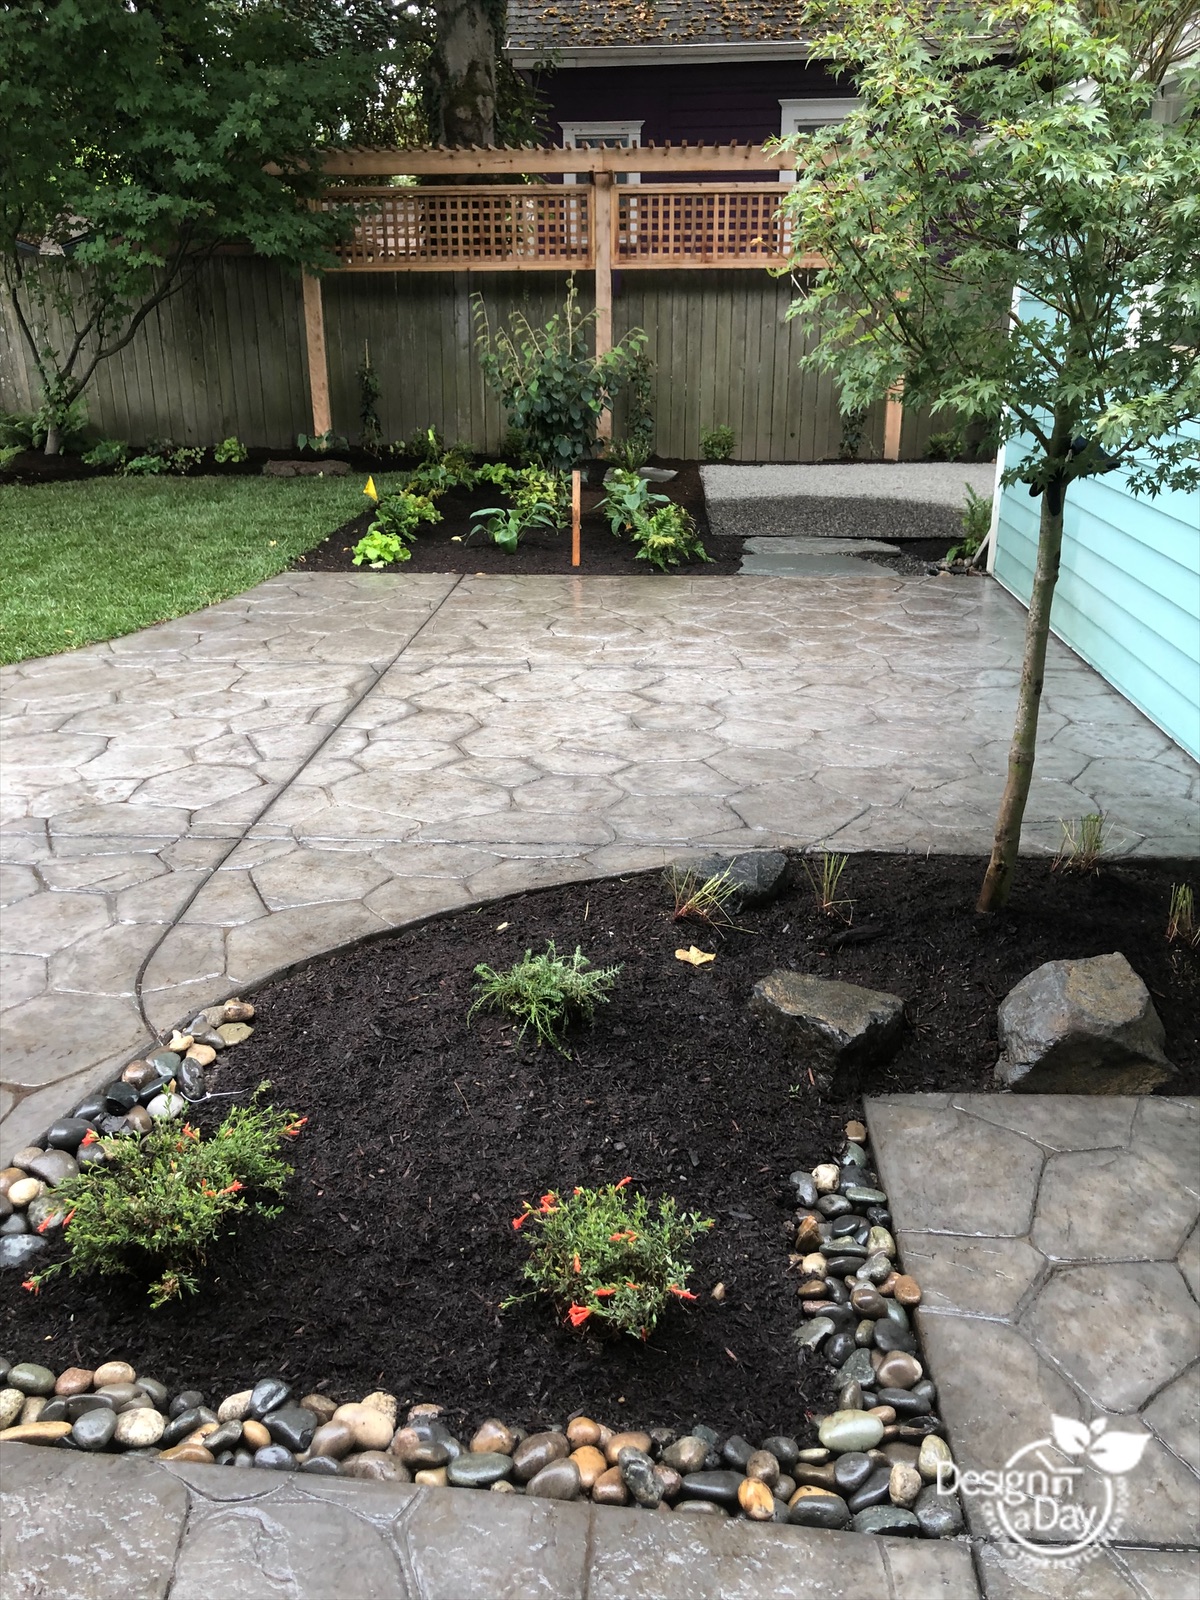 A wooden trellis, Japanese Maple and multiple planting beds complete this private backyard for the family in Portland, Oregon..